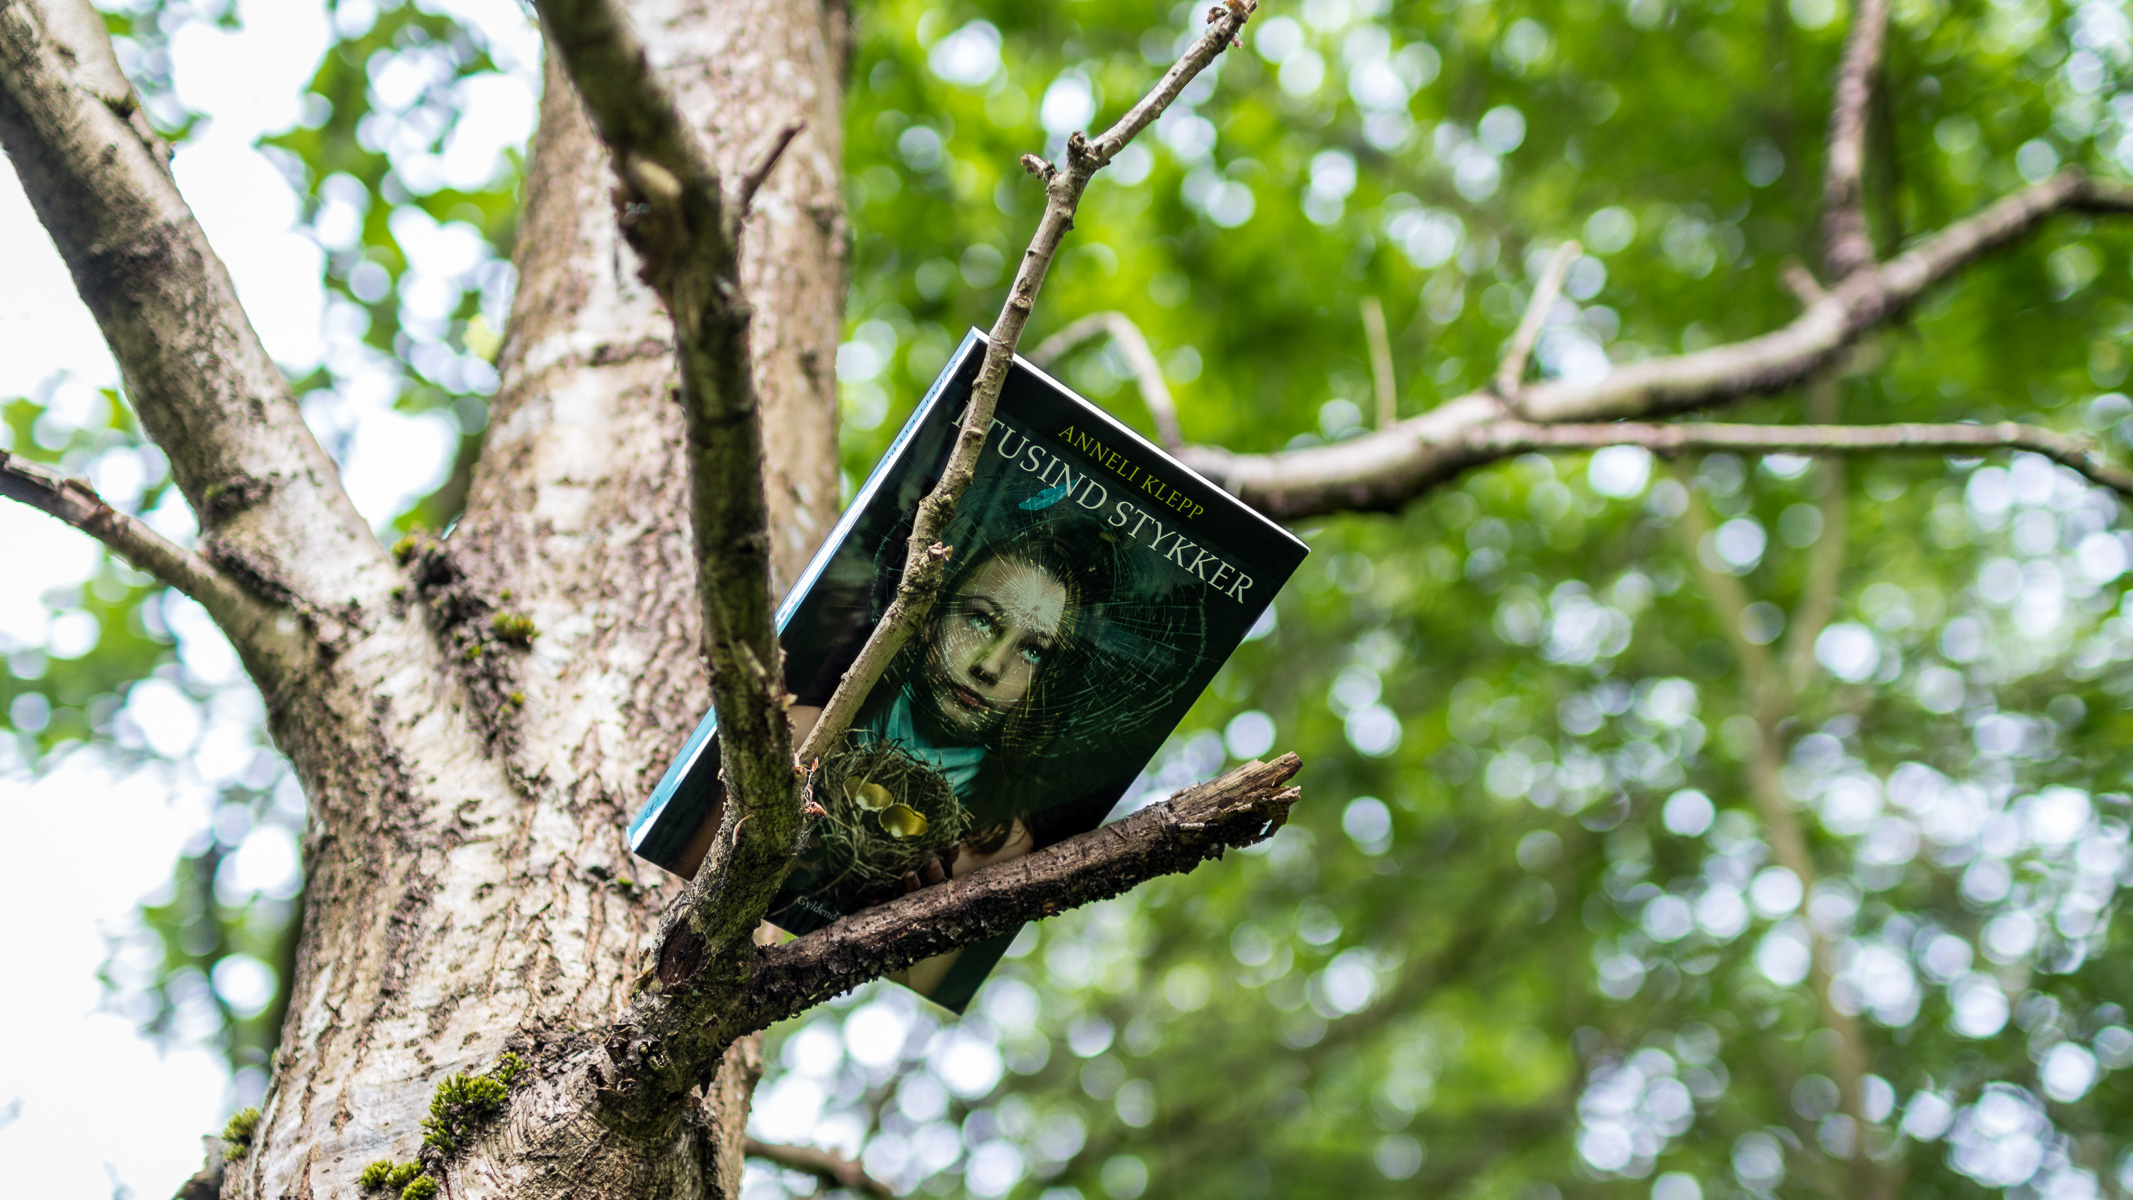 A book lying on branches in a tree.